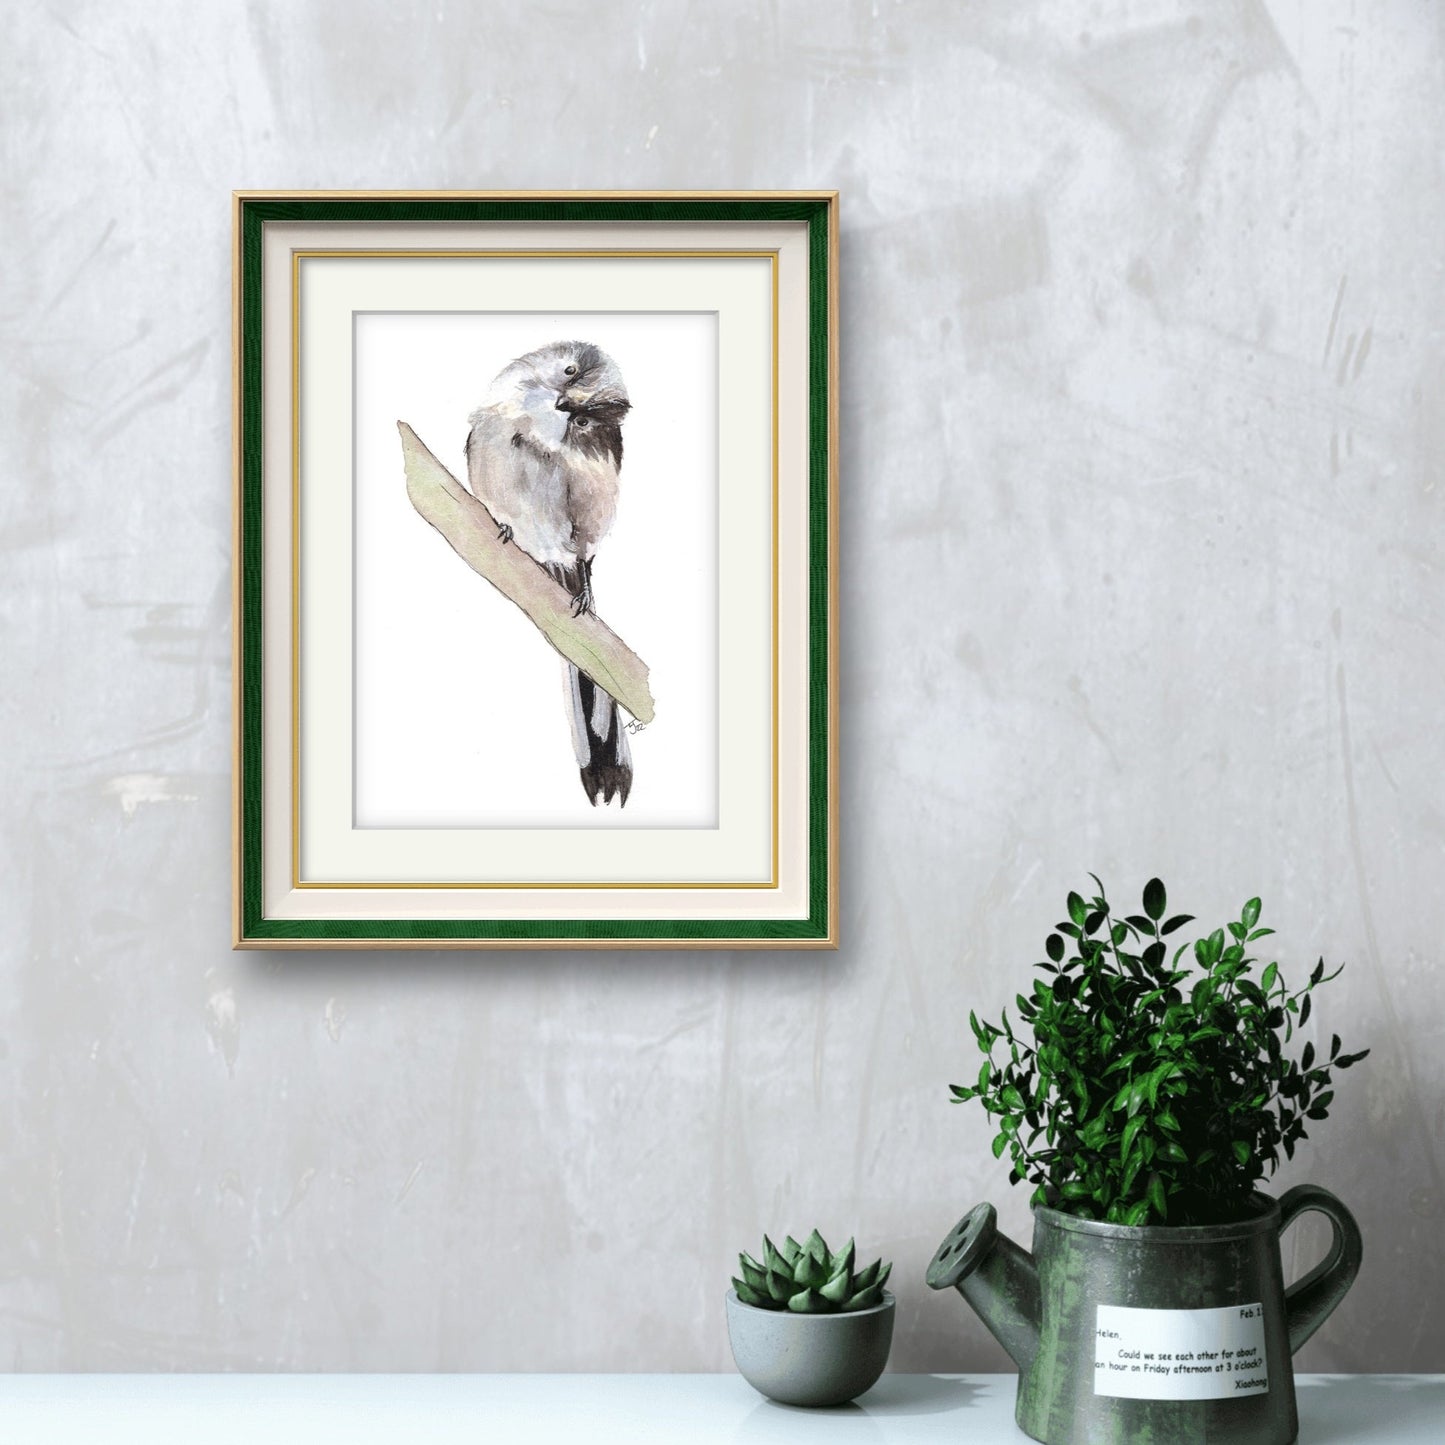 "What's This?" Long Tailed Tit Art Print